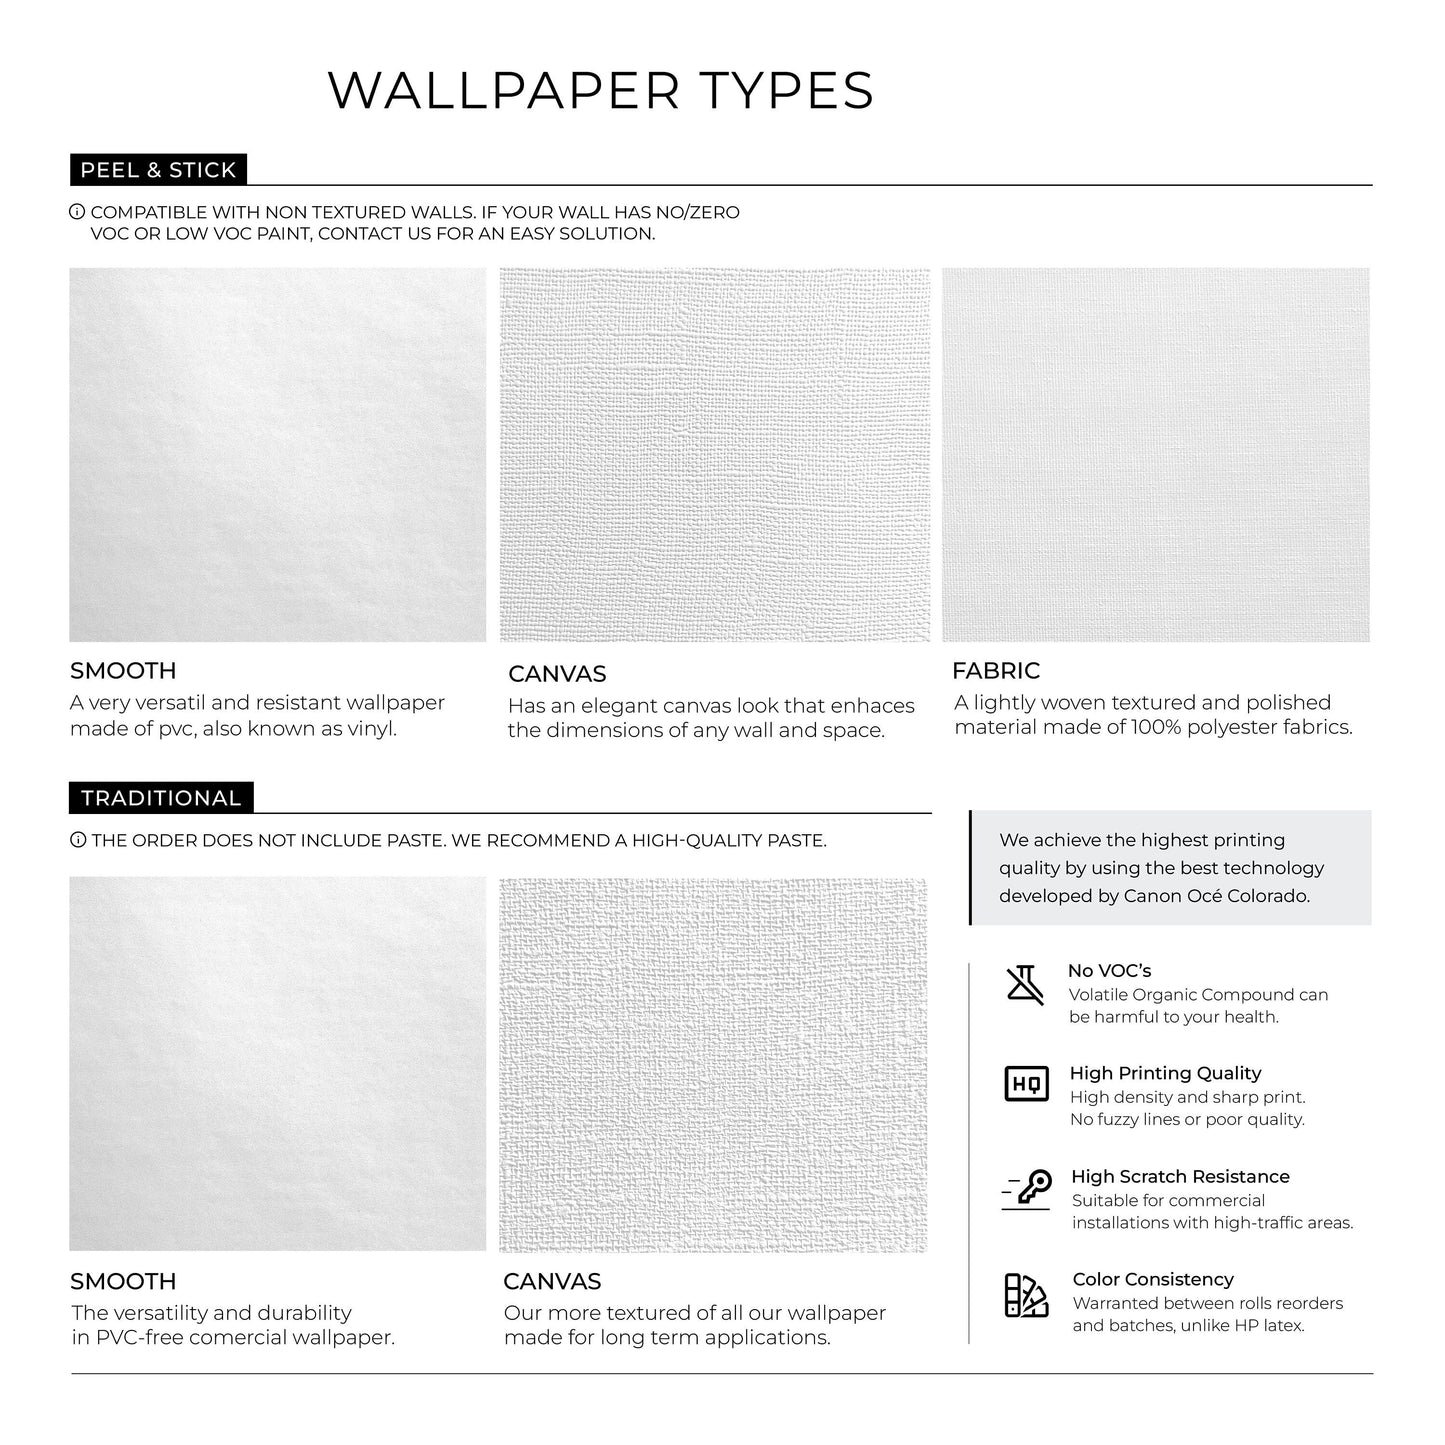 Removable Wallpaper Wall Temporary Wallpaper Nursery Wallpaper Wall Decor Wall Paper Removable Peel and Stick Wallpaper - A687